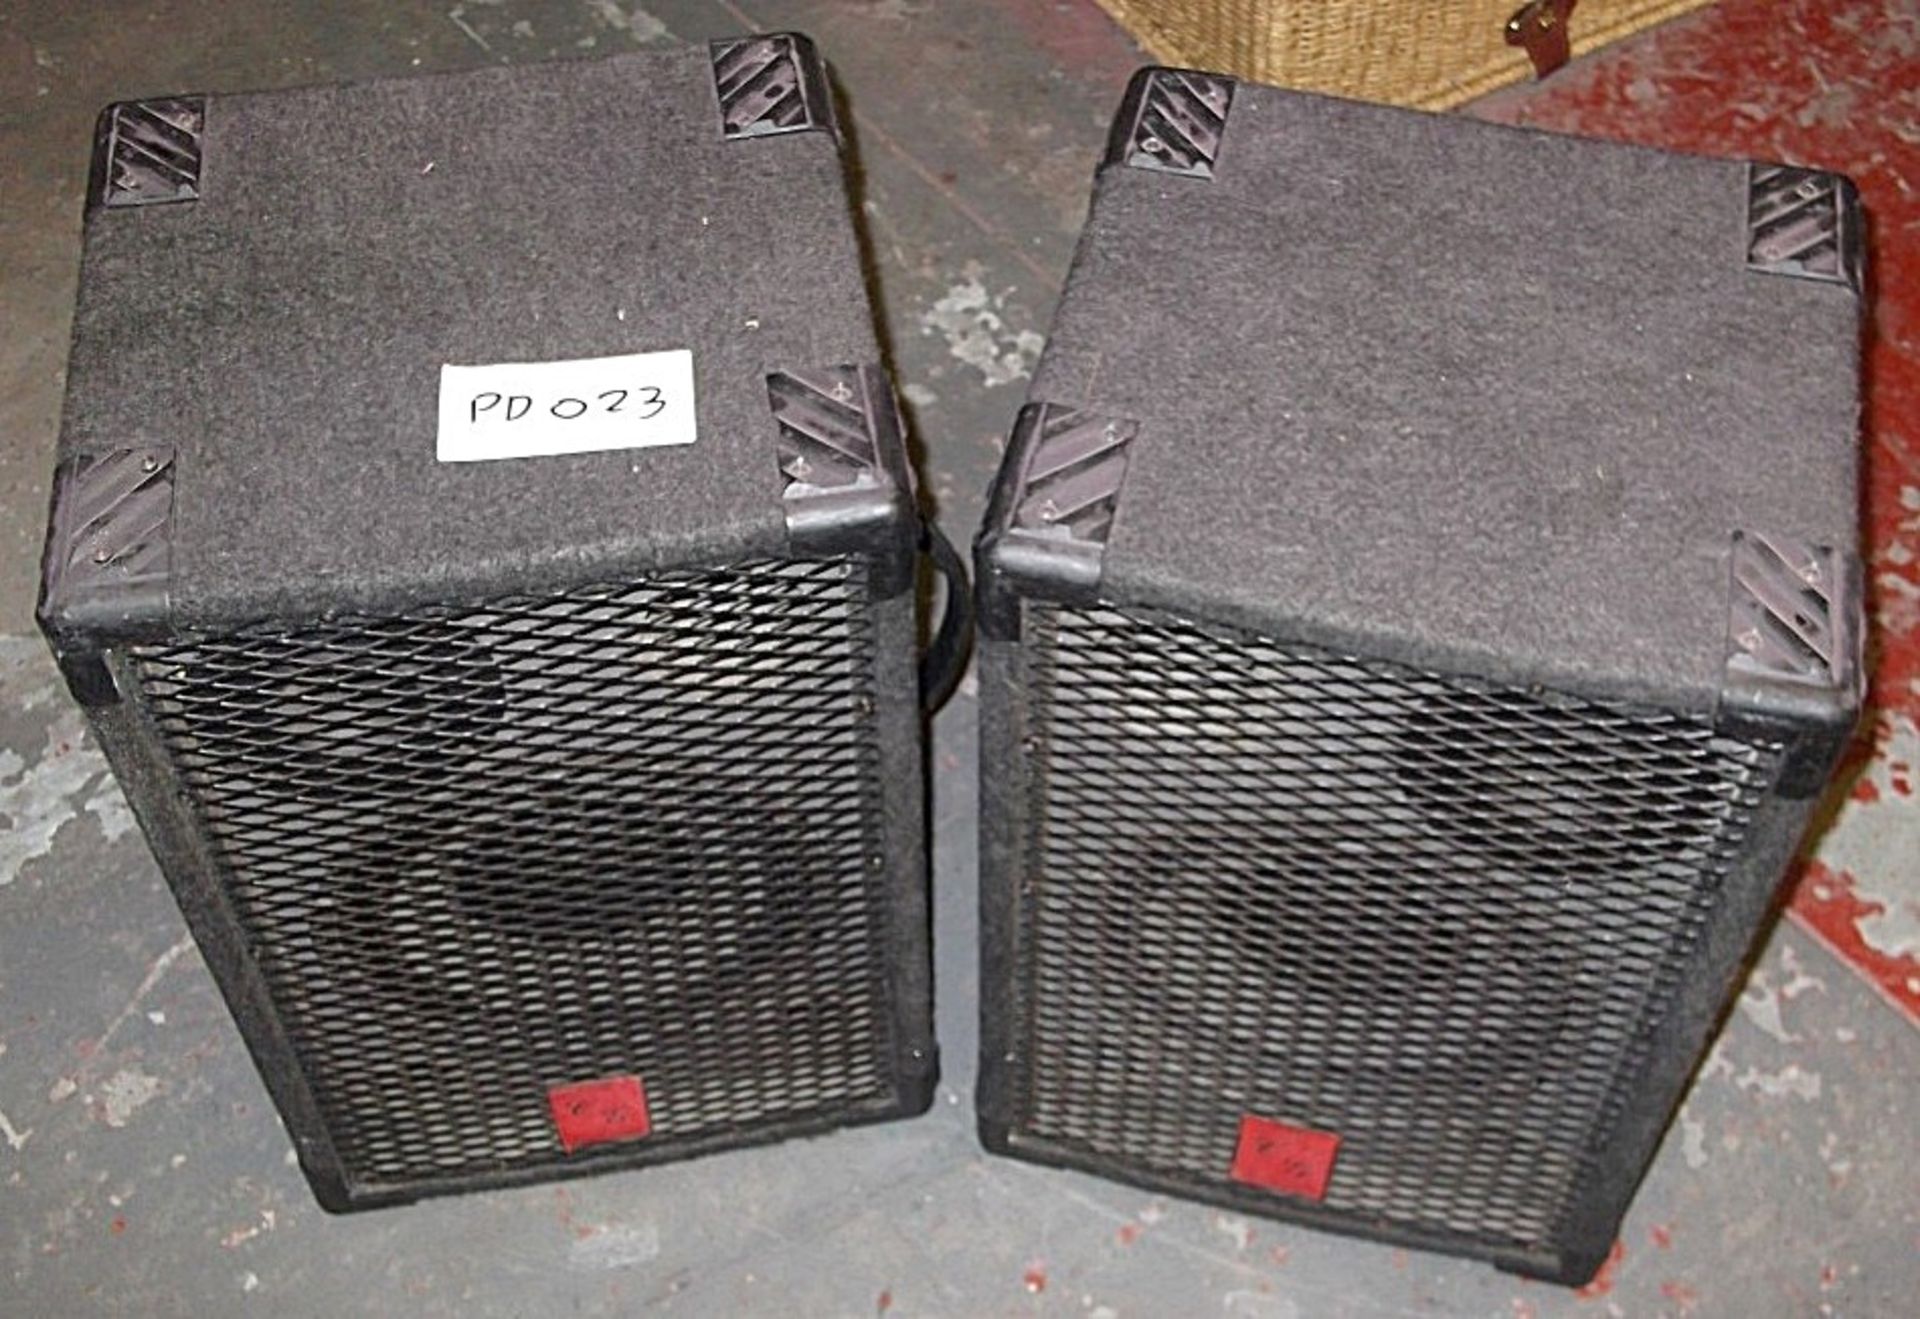 1 x Pair Of Professional Speakers By CG Audio - Good Working Condition - 80nms, 200w RMS MAX - - Image 3 of 3